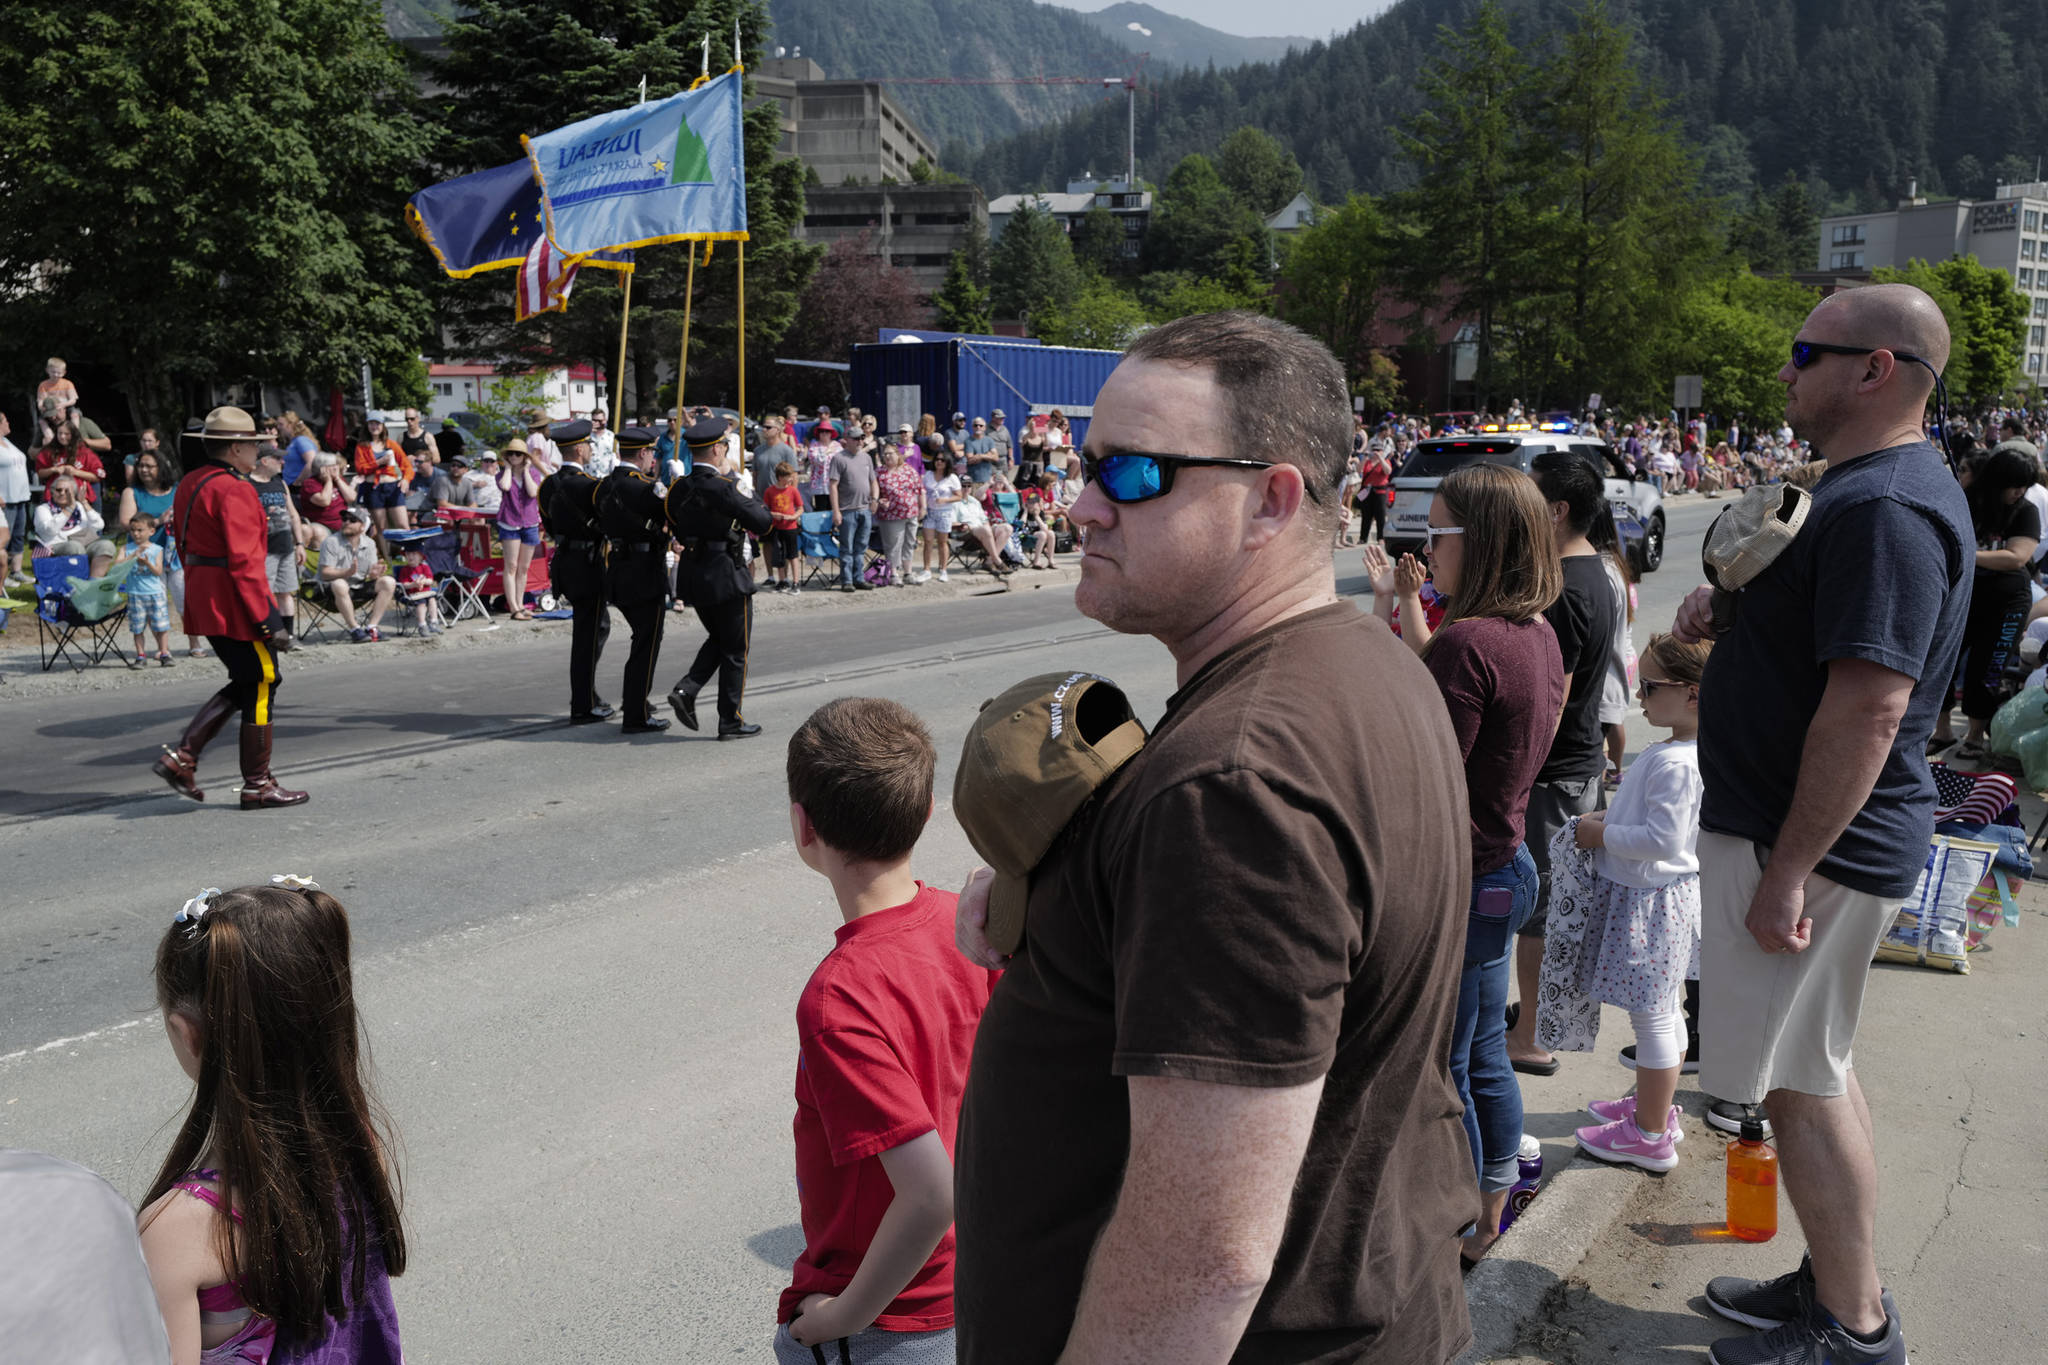 Veteran Chuck McCracken and Ruben Boudreaux, right, currently in the Coast Guard, take their hats off as a Juneau Police Department Honor Guard and Canadian Mounties pass by during the Juneau Fourth of July Parade on Thursday, July 4, 2019. (Michael Penn | Juneau Empire)